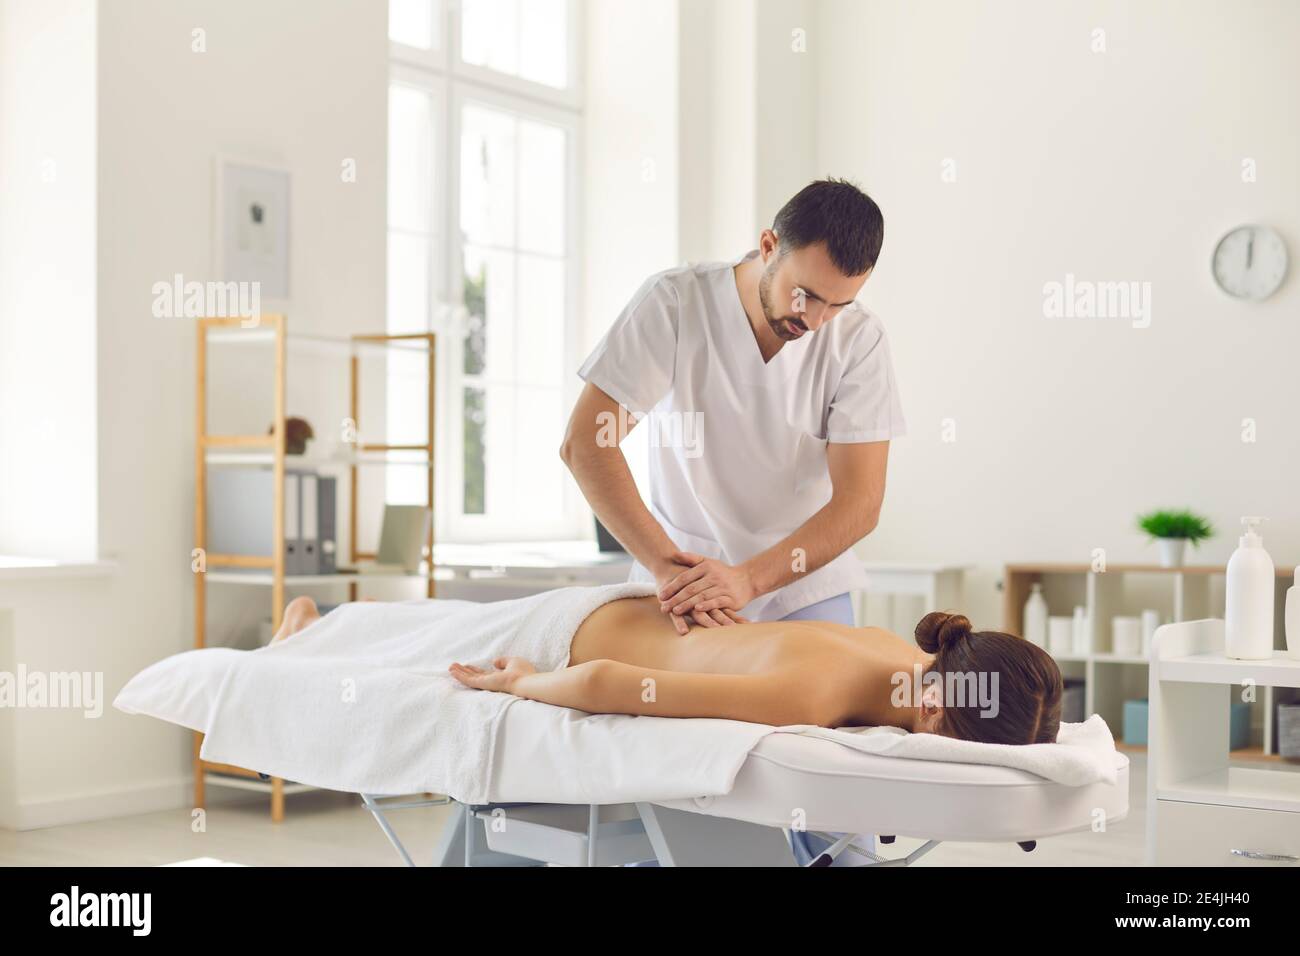 Massage session in medical clinic from professional doctor masseur Stock Photo